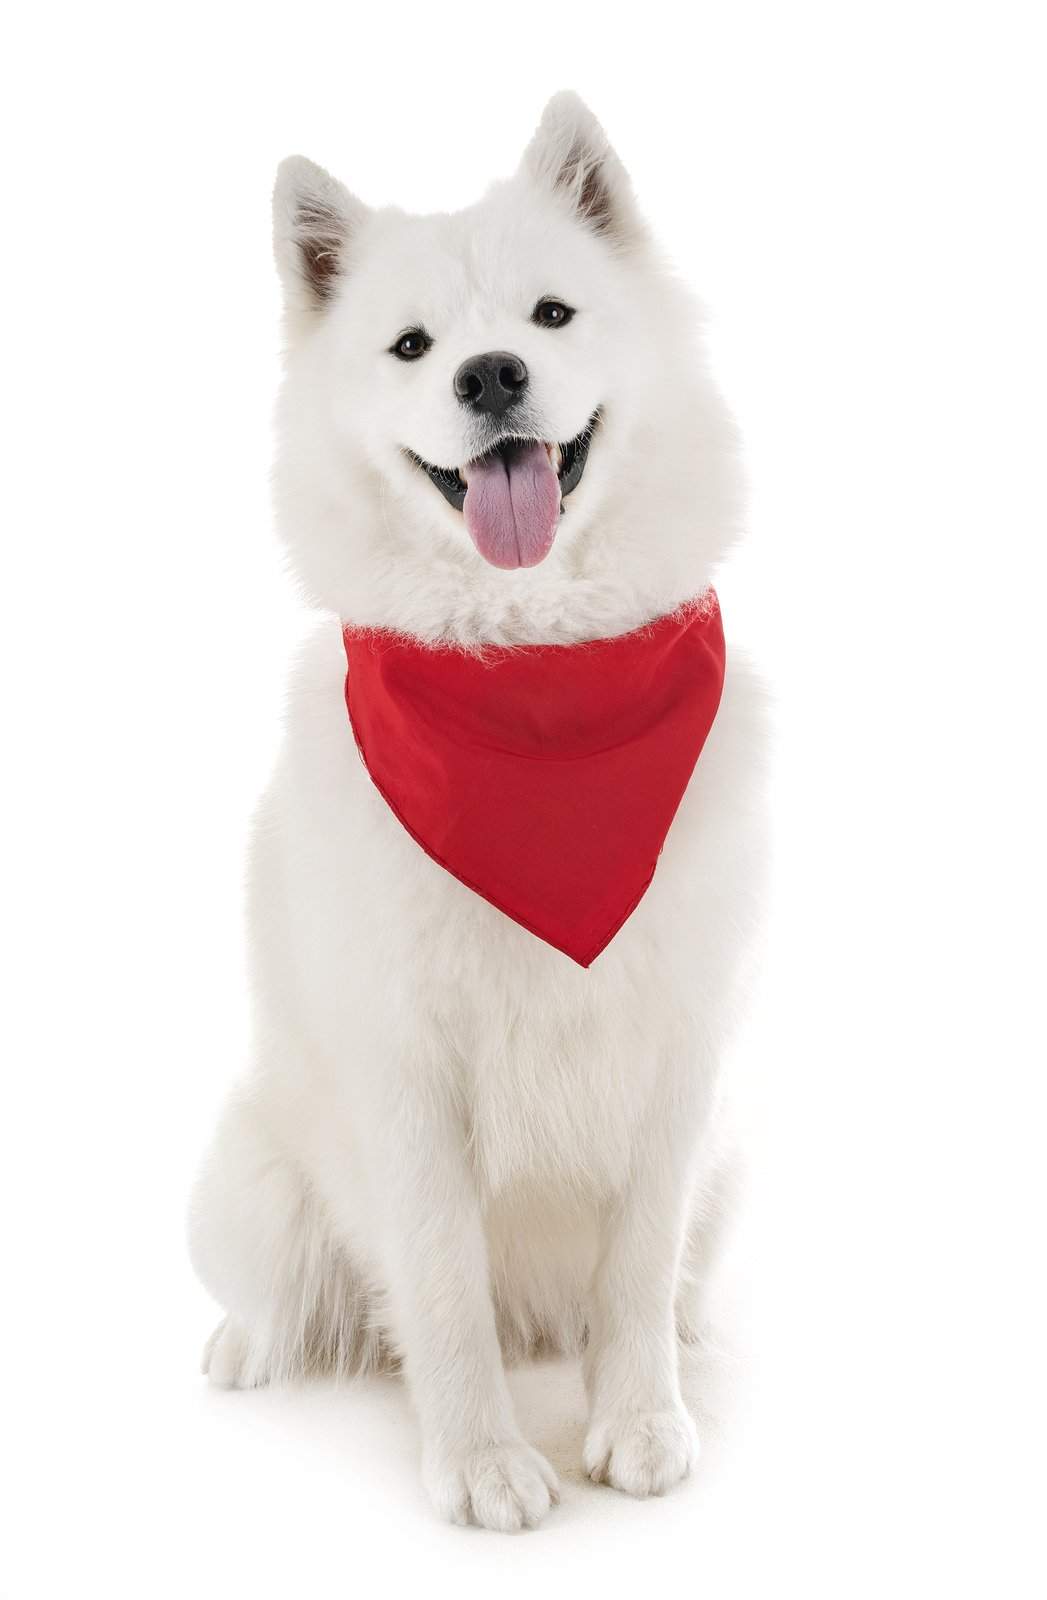 Dog Cotton Bandanas - 4 Pack - Scarf Triangle Bibs for Small, Medium and Large Puppies, Dogs and Cats